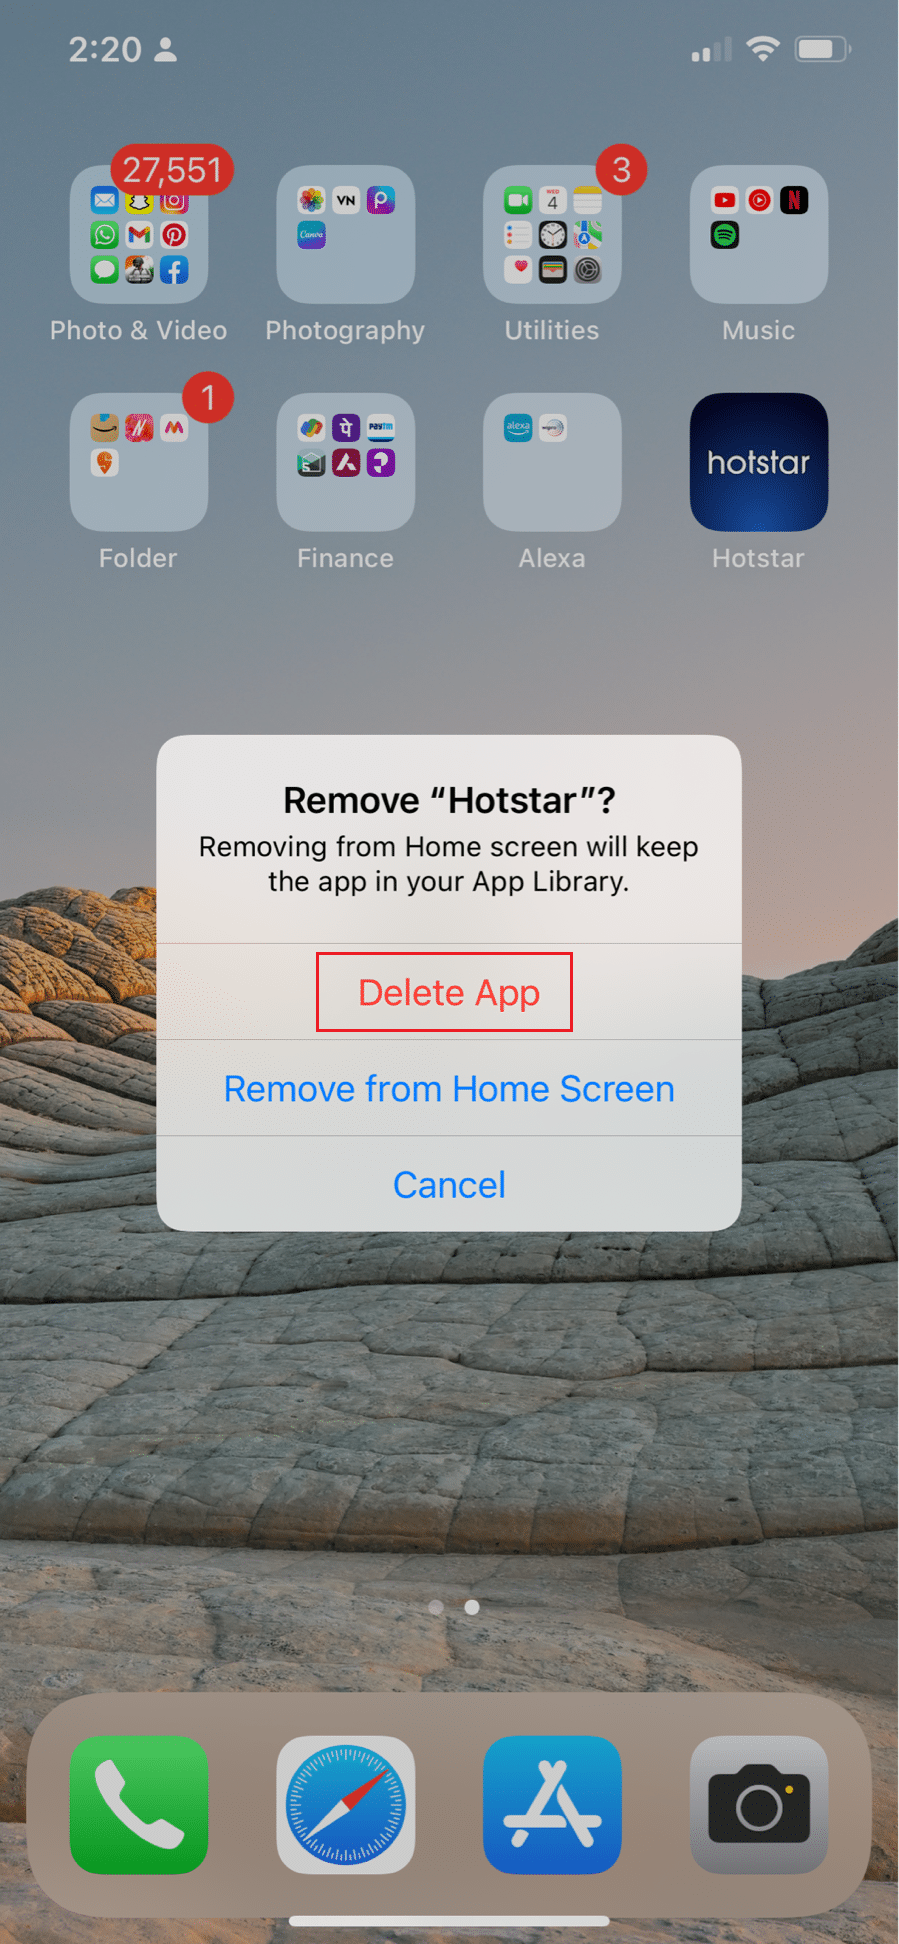 select delete app option to remove hotstar app in Iphone